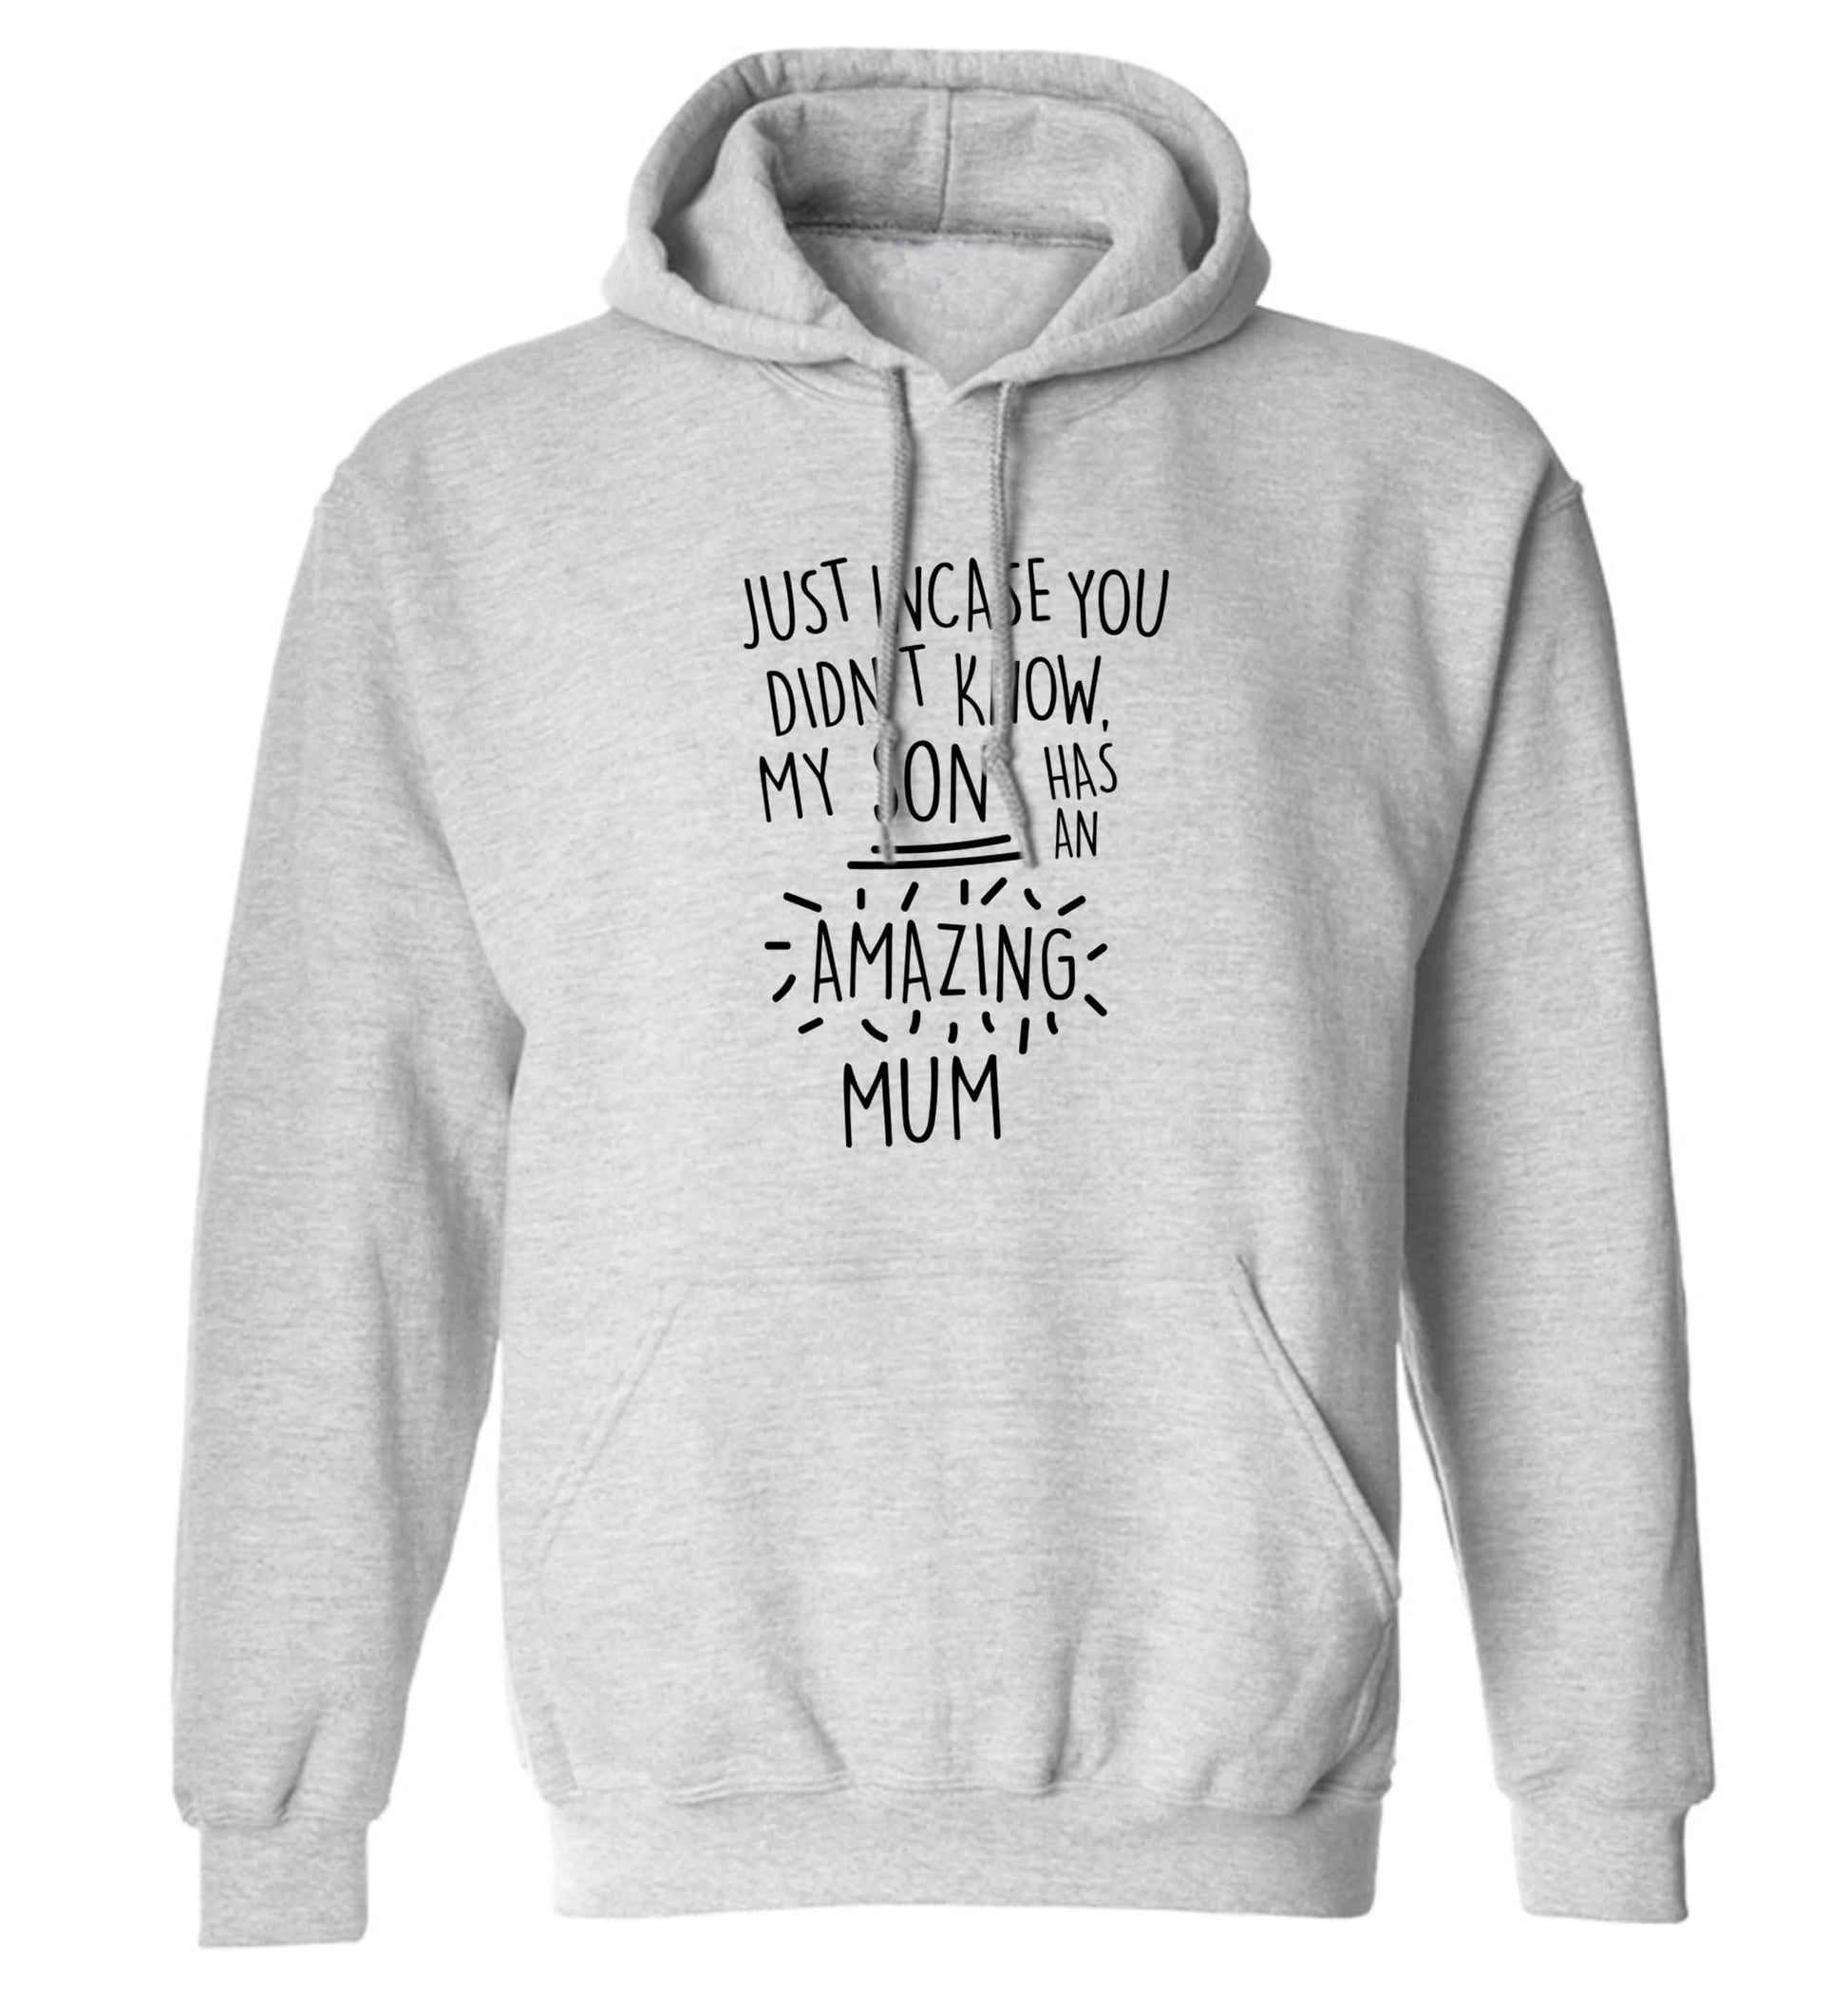 Just incase you didn't know my son has an amazing mum adults unisex grey hoodie 2XL